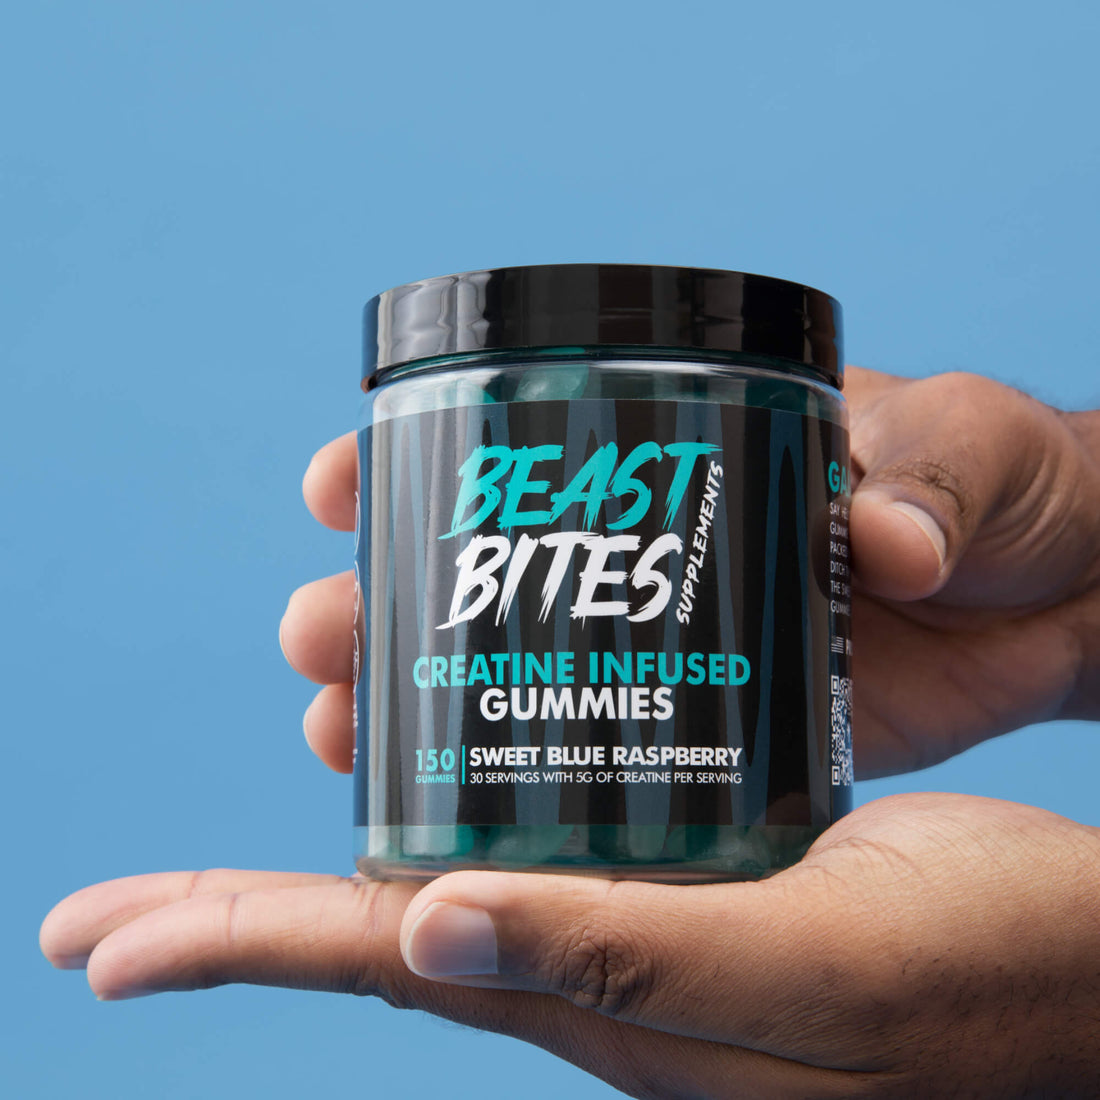 Grizzly Bites - The Benefits of Creatine Gummies